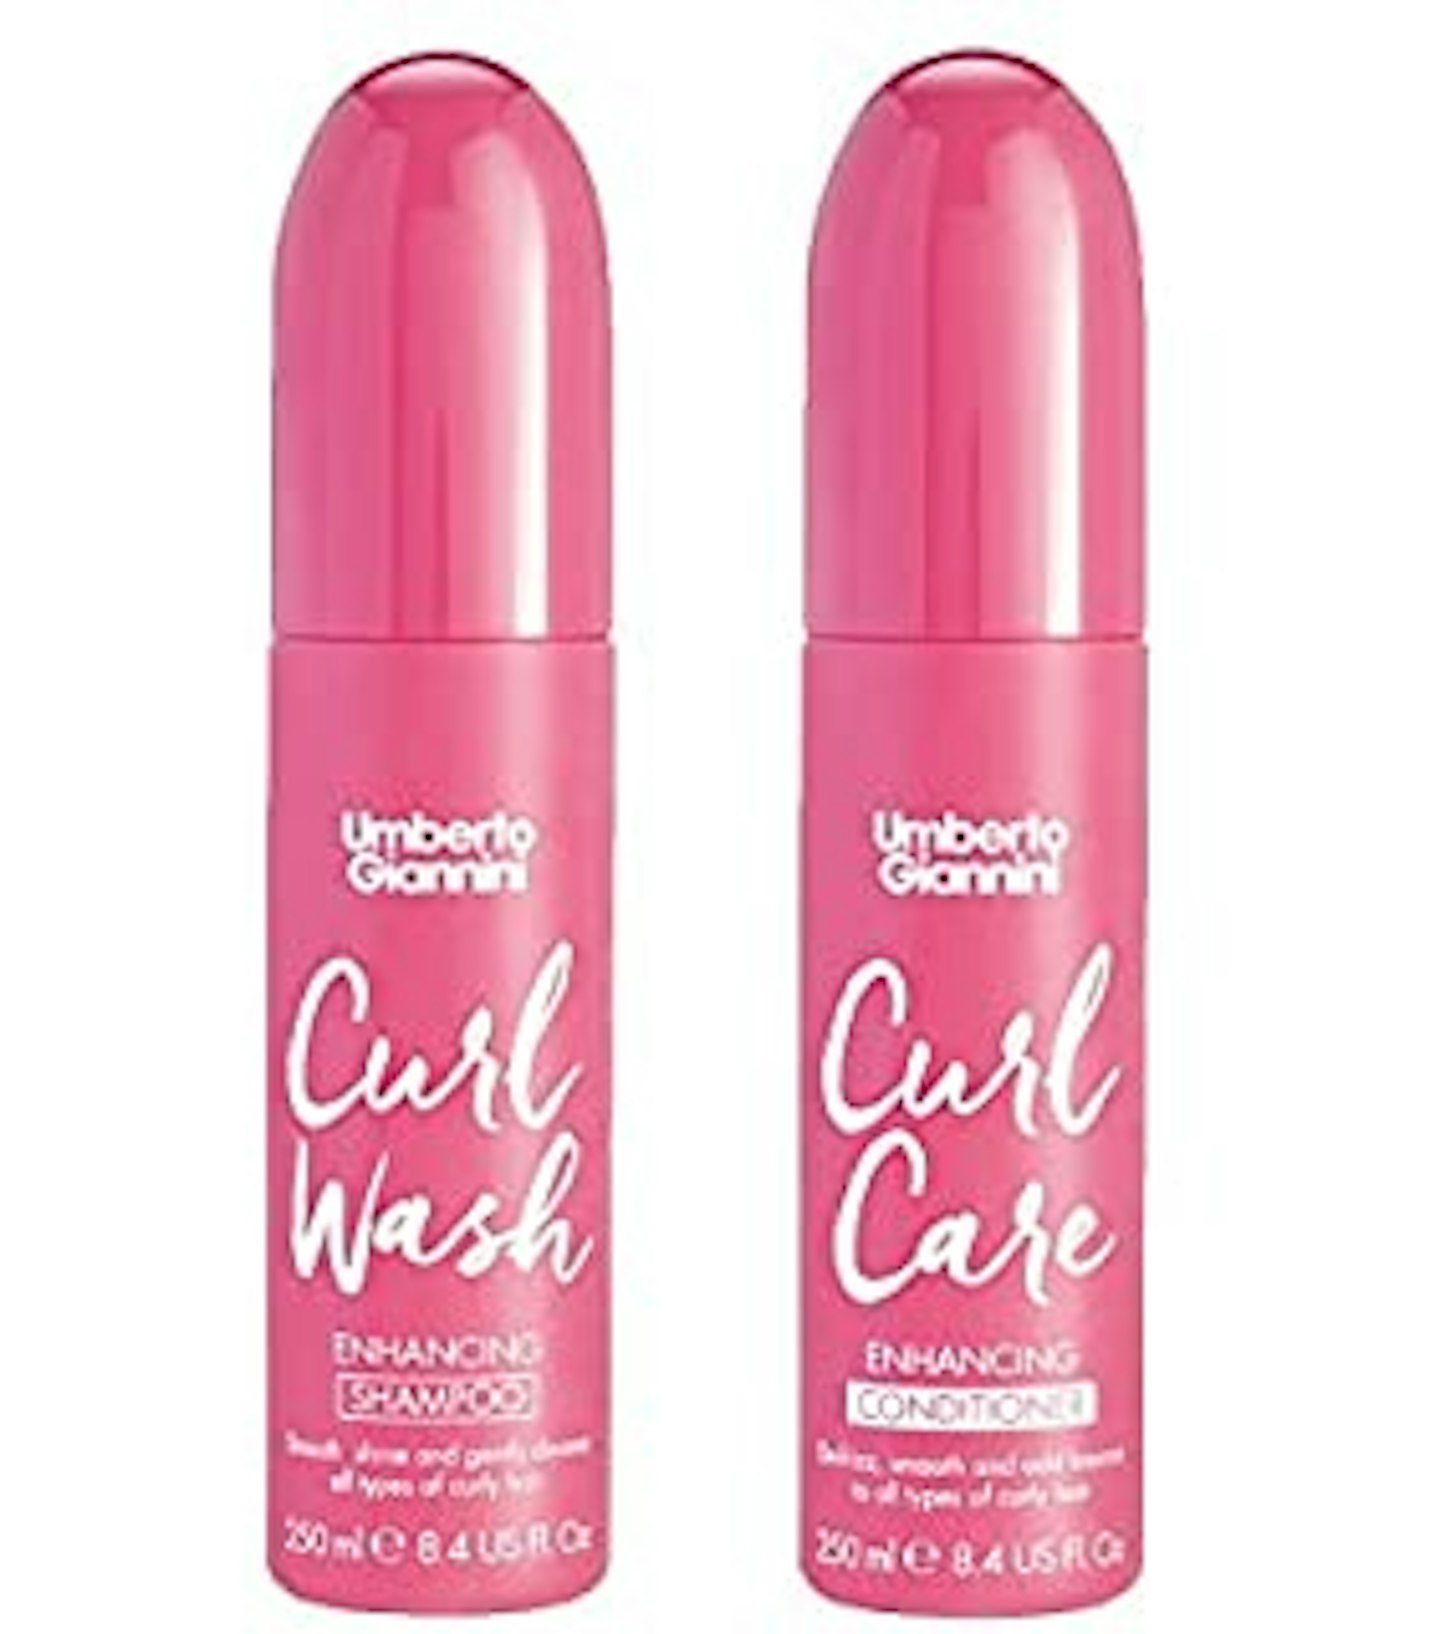 Umberto Giannini Curl Care Shampoo & Conditioner, from £6